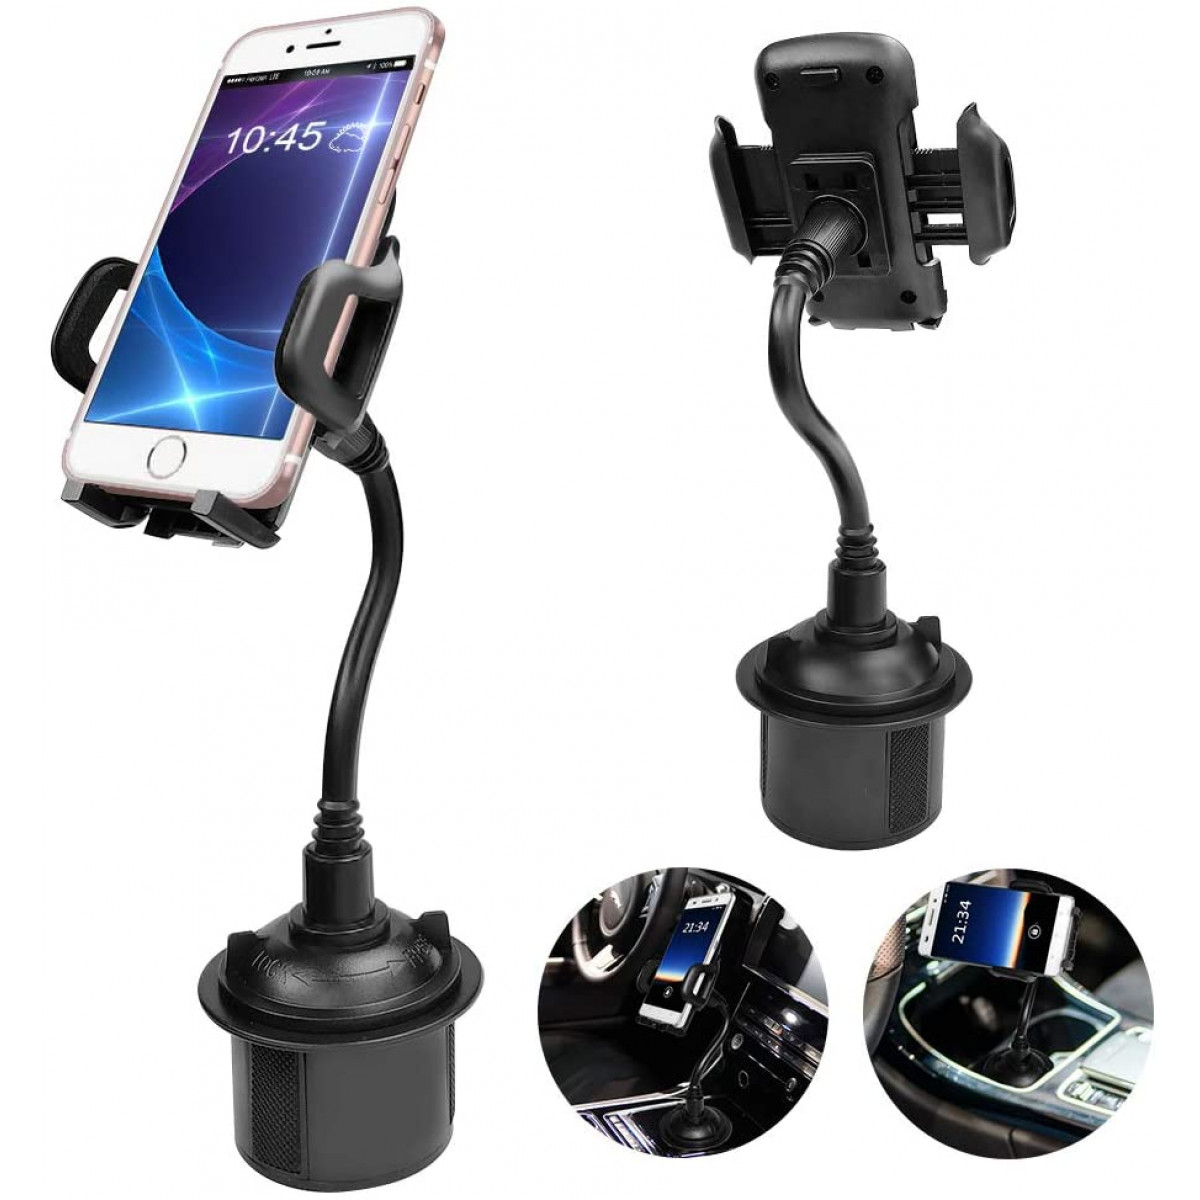 S9/ S9 BTMAGIC Cell Phone Car Cradles & Mounts,Universal Adjustable Cup Holder for iPhone Xs/Max/X/XR/8/8 Plus,Samsung Note 9/ S10 S8,GPS 